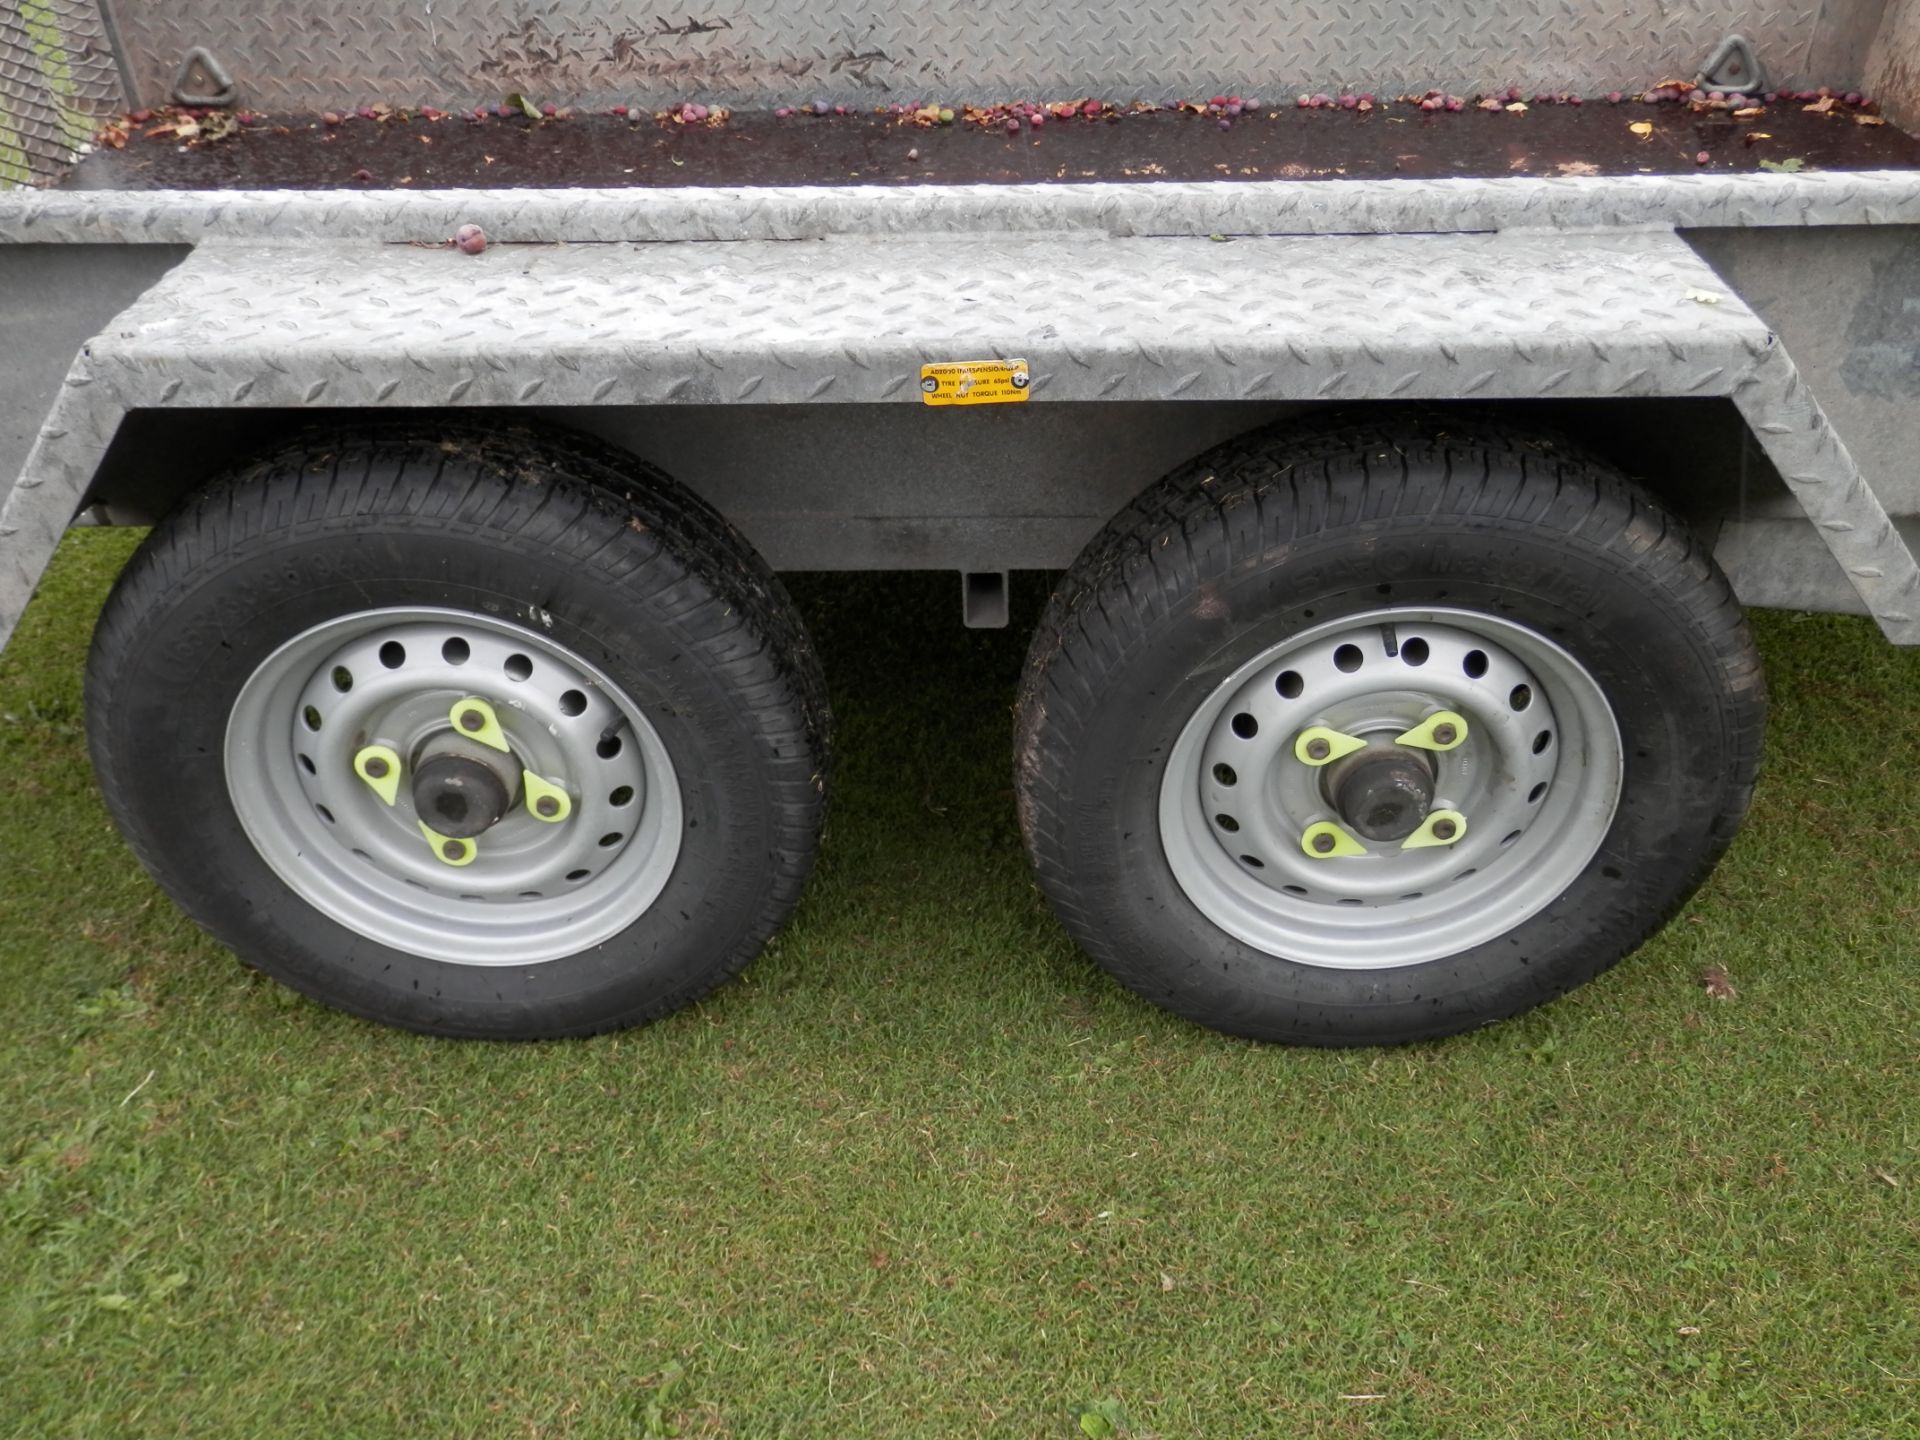 INDESPENSION 4 WHEEL PLANT TRAILER, 2600KG. VERY GOOD CONDITION, GOOD SOLID TRAILER. - Image 11 of 11